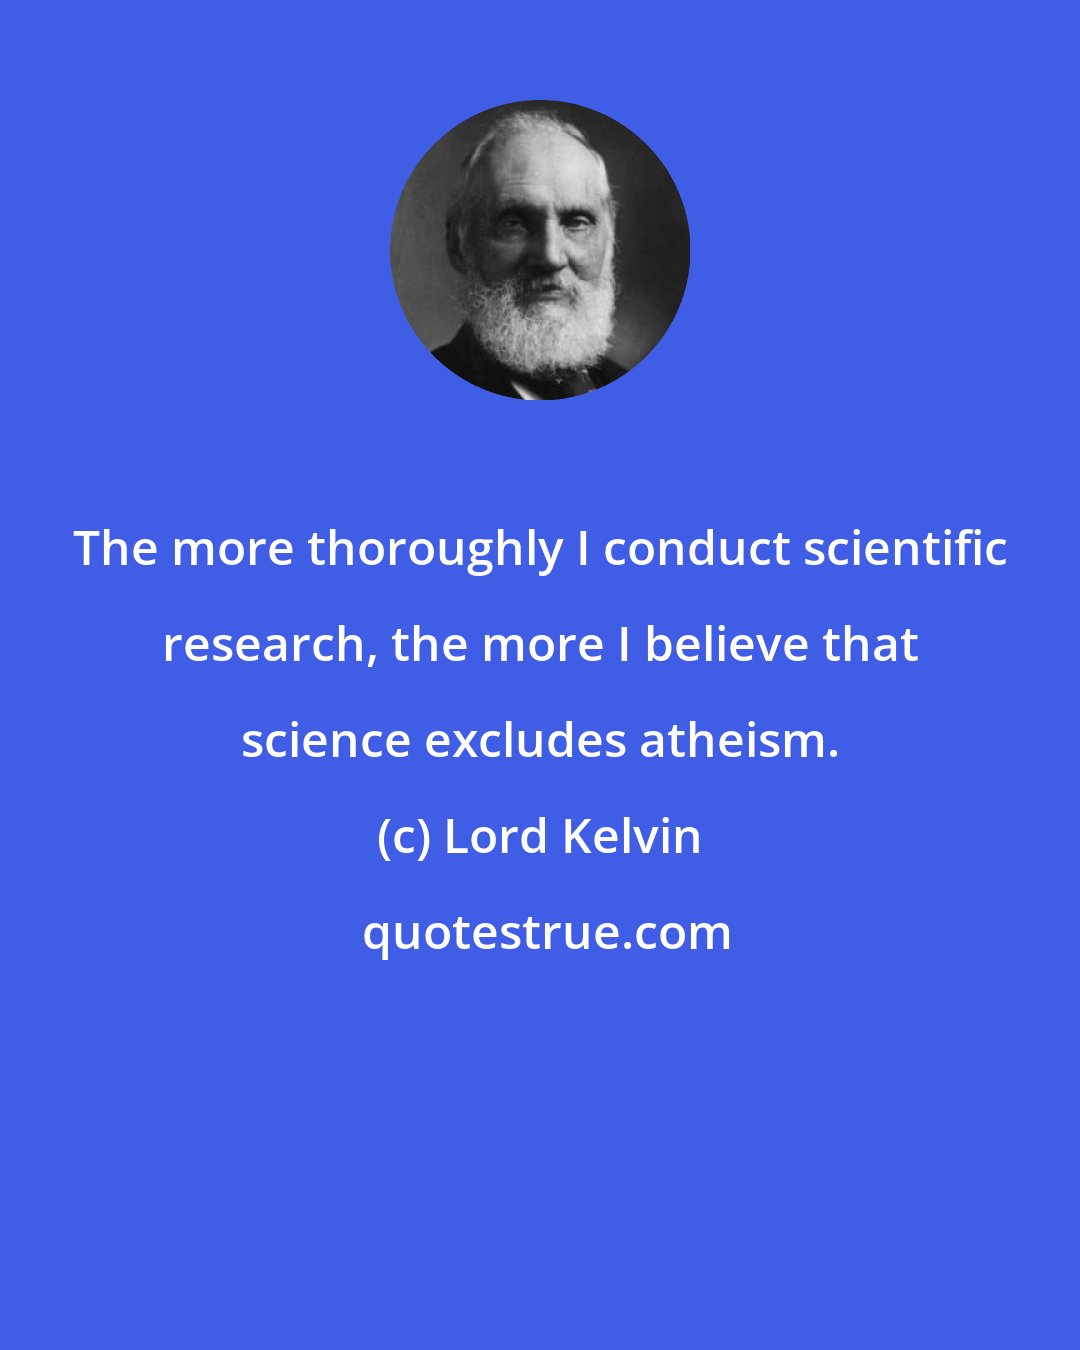 Lord Kelvin: The more thoroughly I conduct scientific research, the more I believe that science excludes atheism.